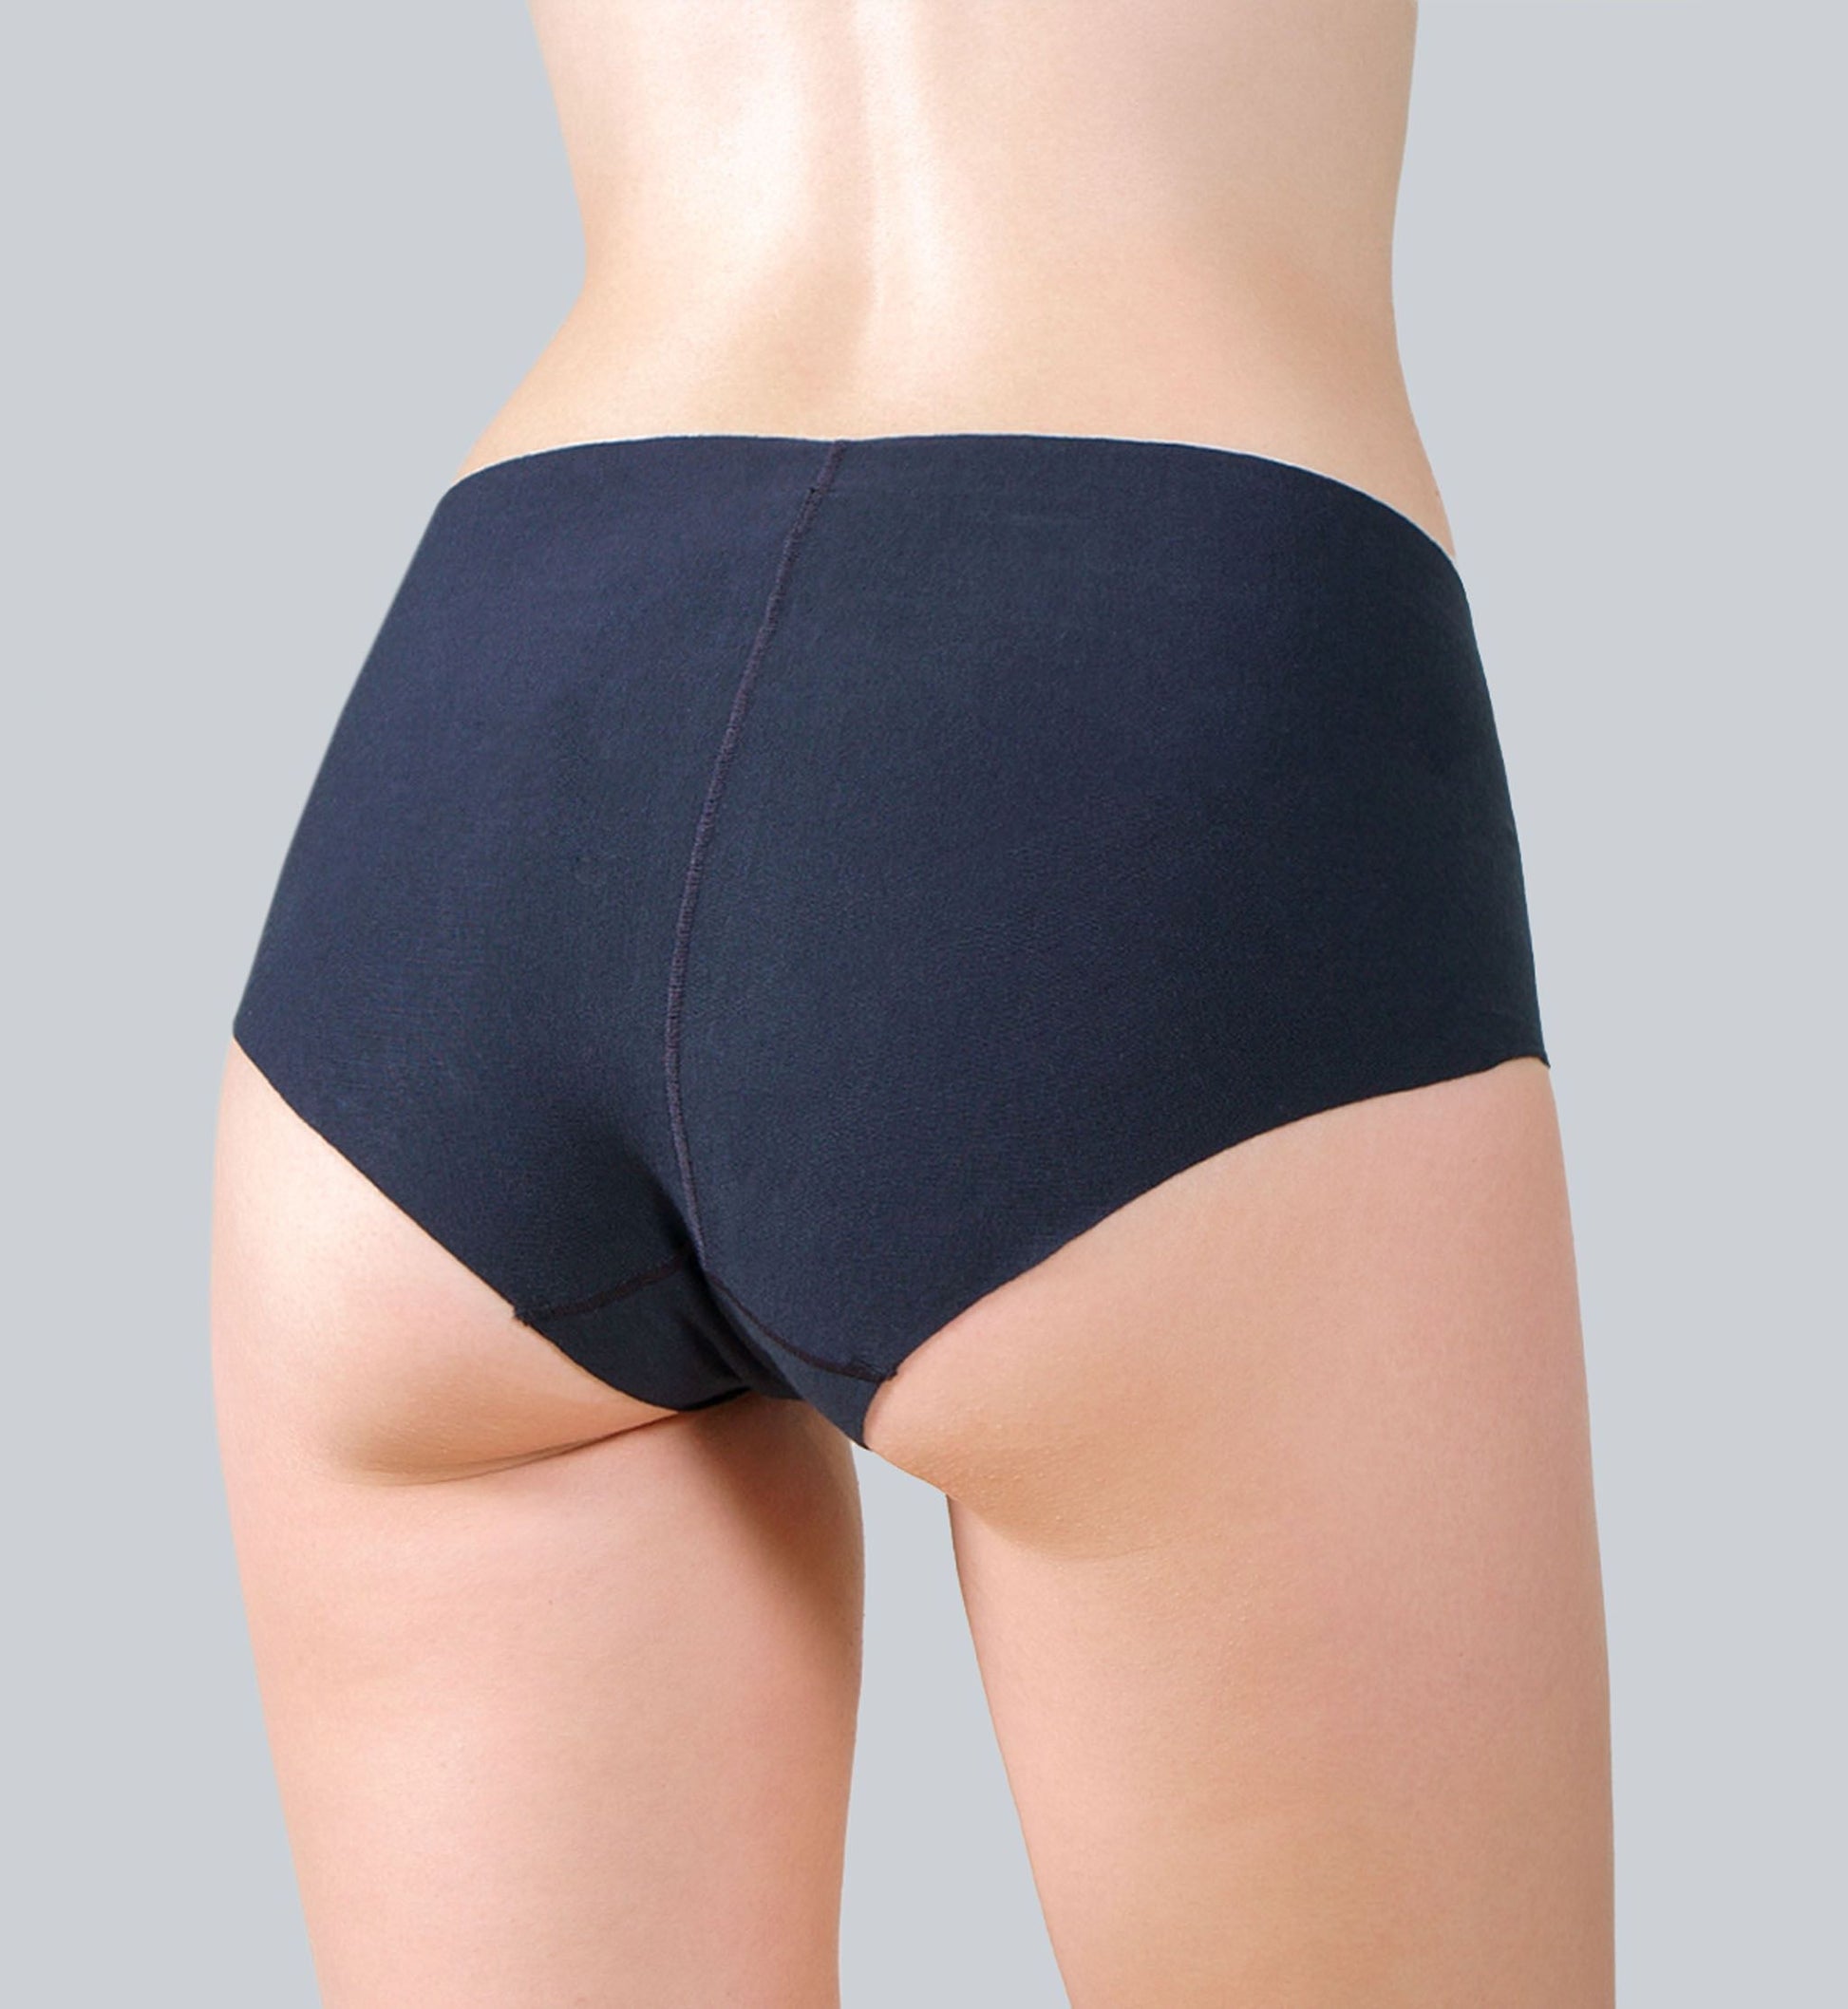 This Laser Cut Cotton Full Brief by EGi boasts a seamless fabric construction and optimal stretchability, making it ideal for all-day wear. Its thin, breathable cotton fabric ensures superior comfort, while its sweat-wicking fabric technology ensures dryness around the clock.